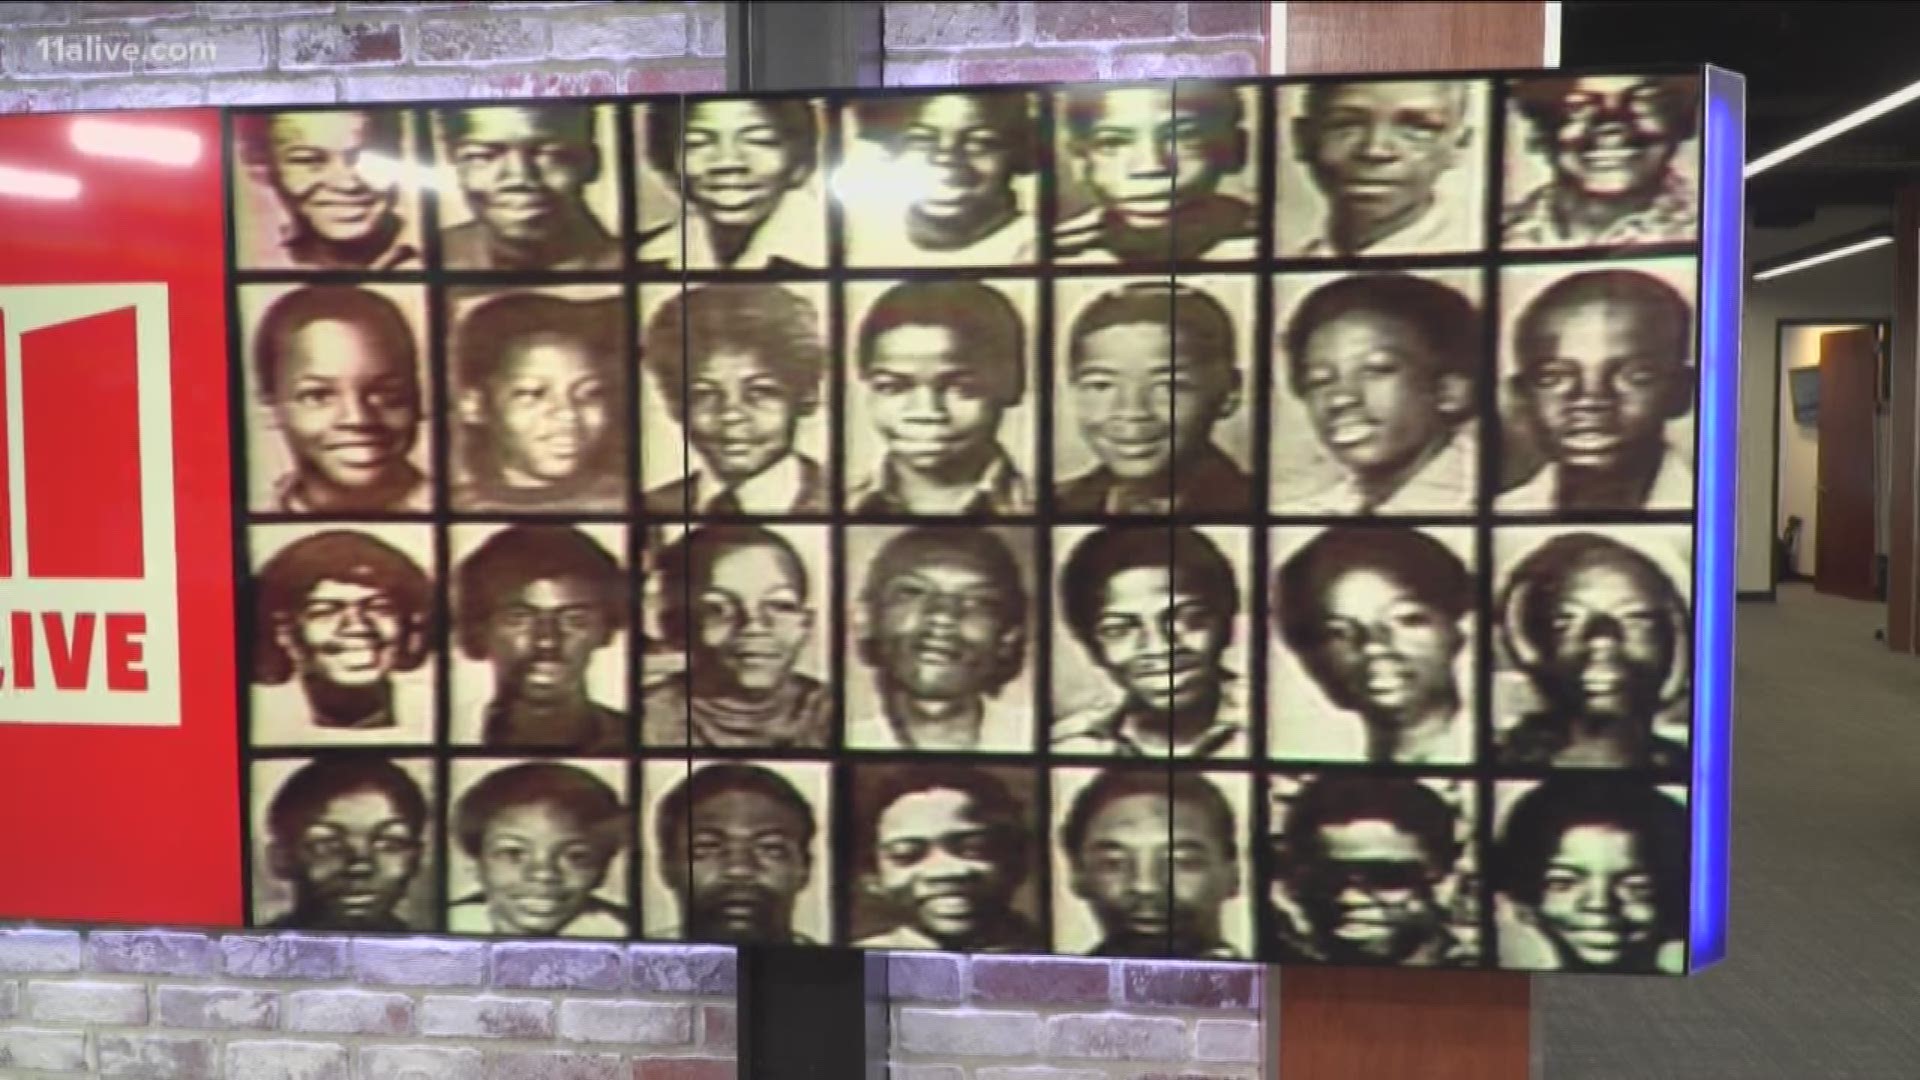 29 child murders were reported between 1979 and 1981 in Atlanta - and no one was ever charged.